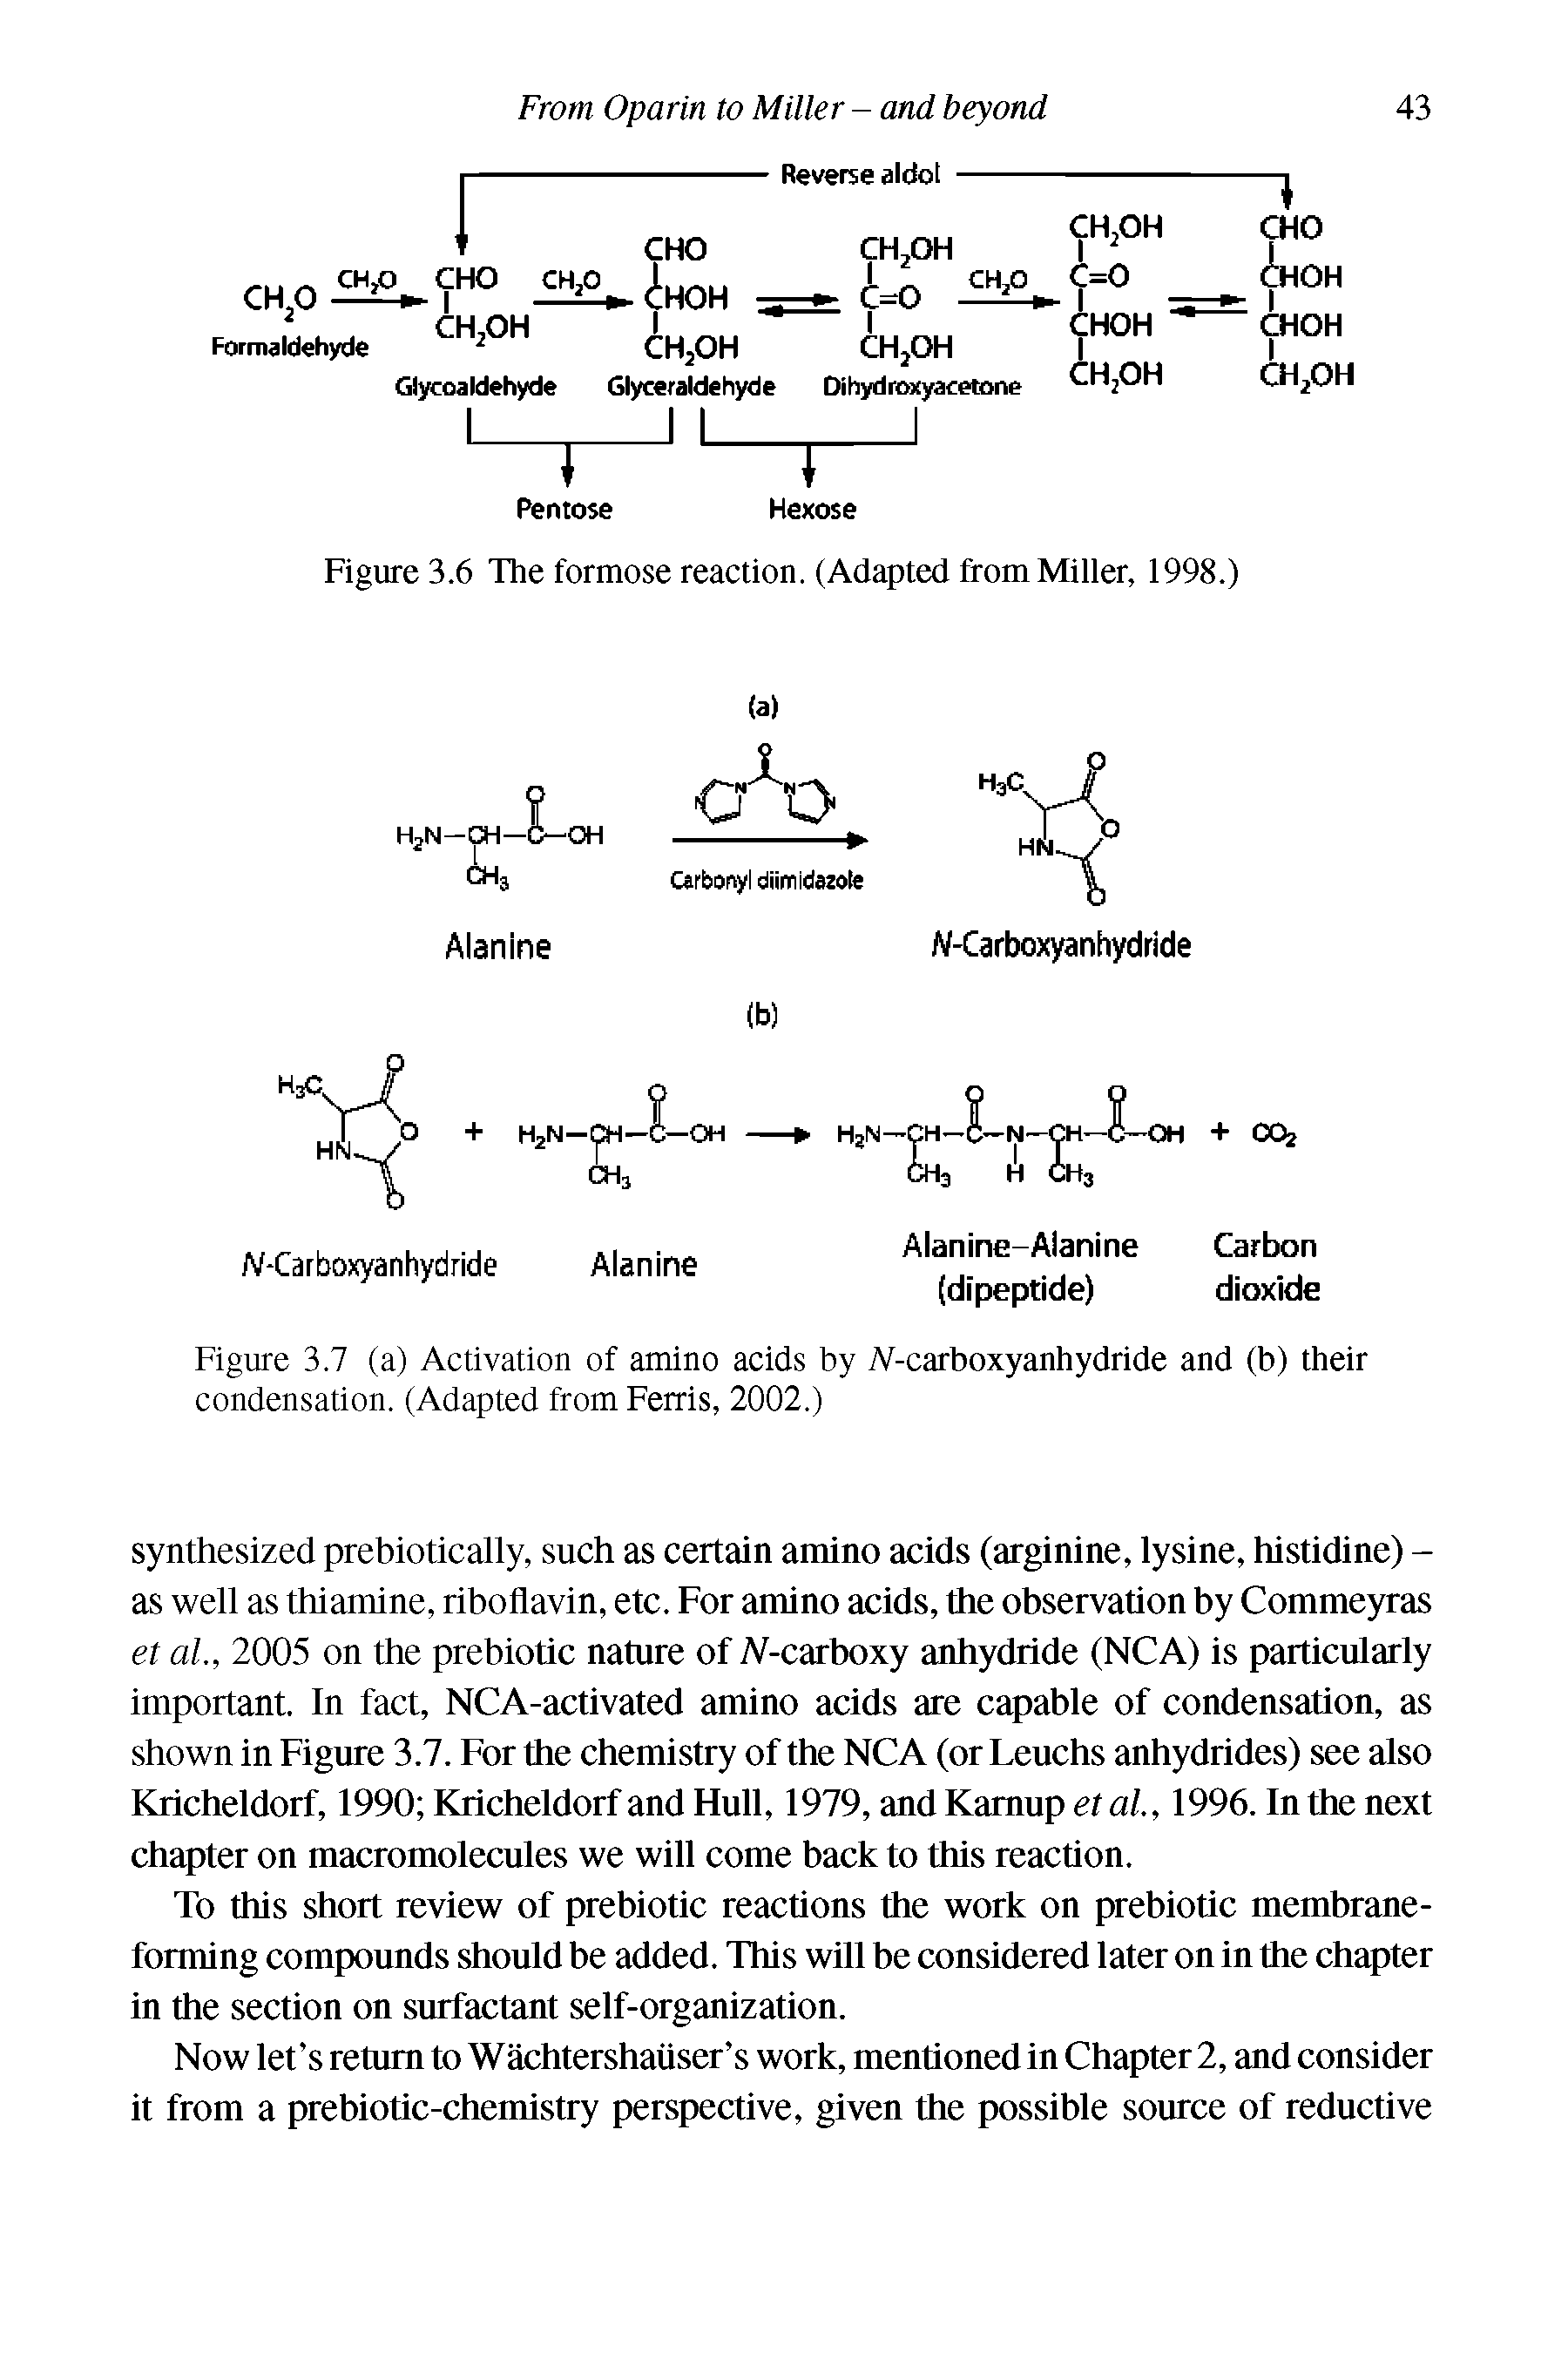 Figure 3.6 The formose reaction. (Adapted from Miller, 1998.)...